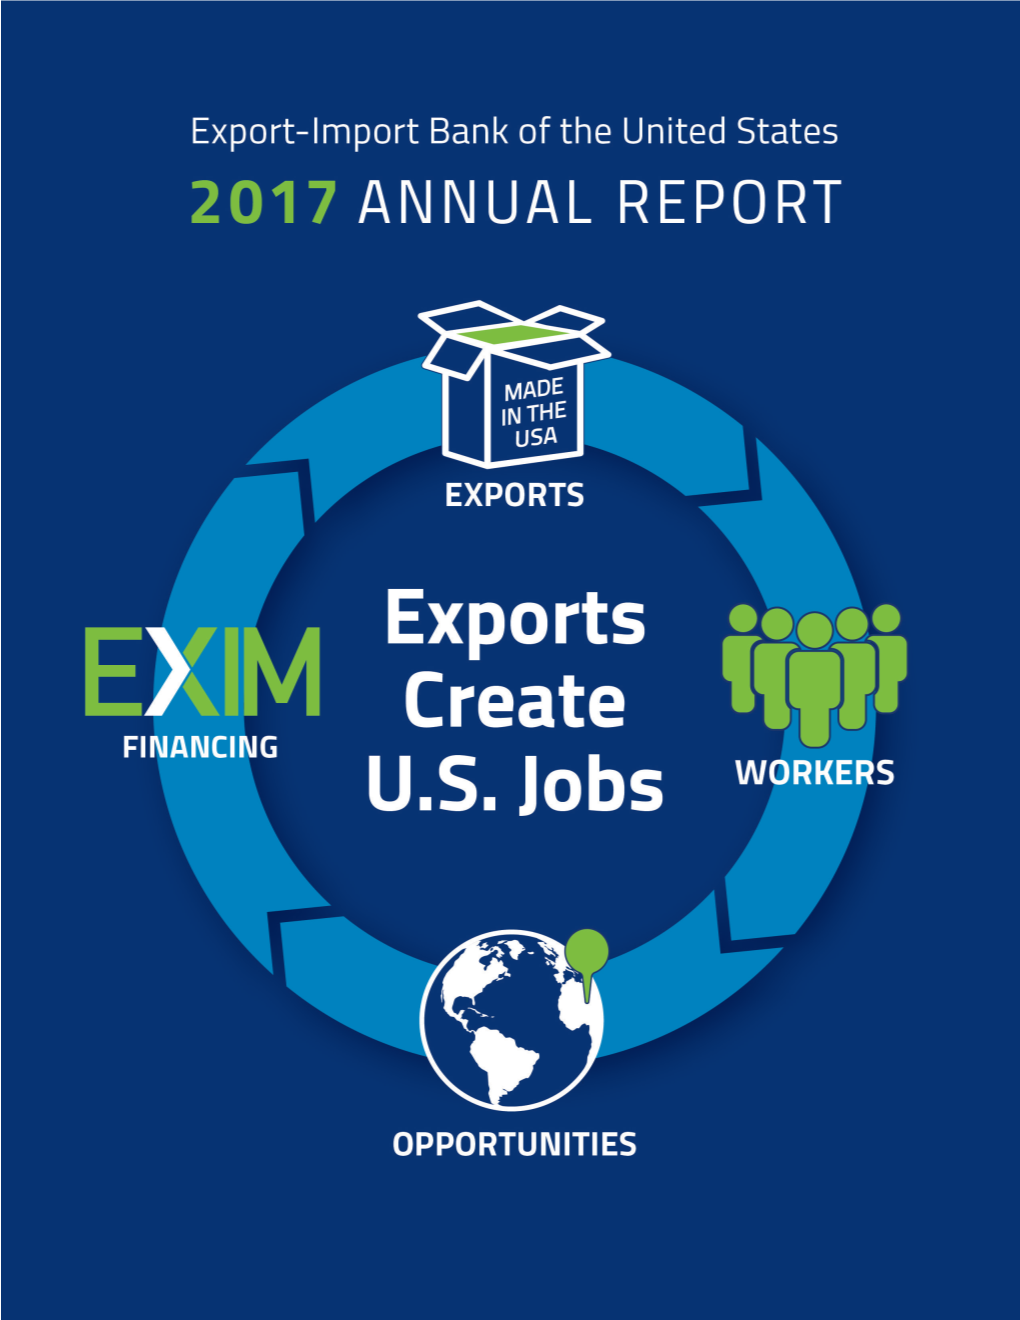 Export-Import Bank of the United States-2017 Annual Report